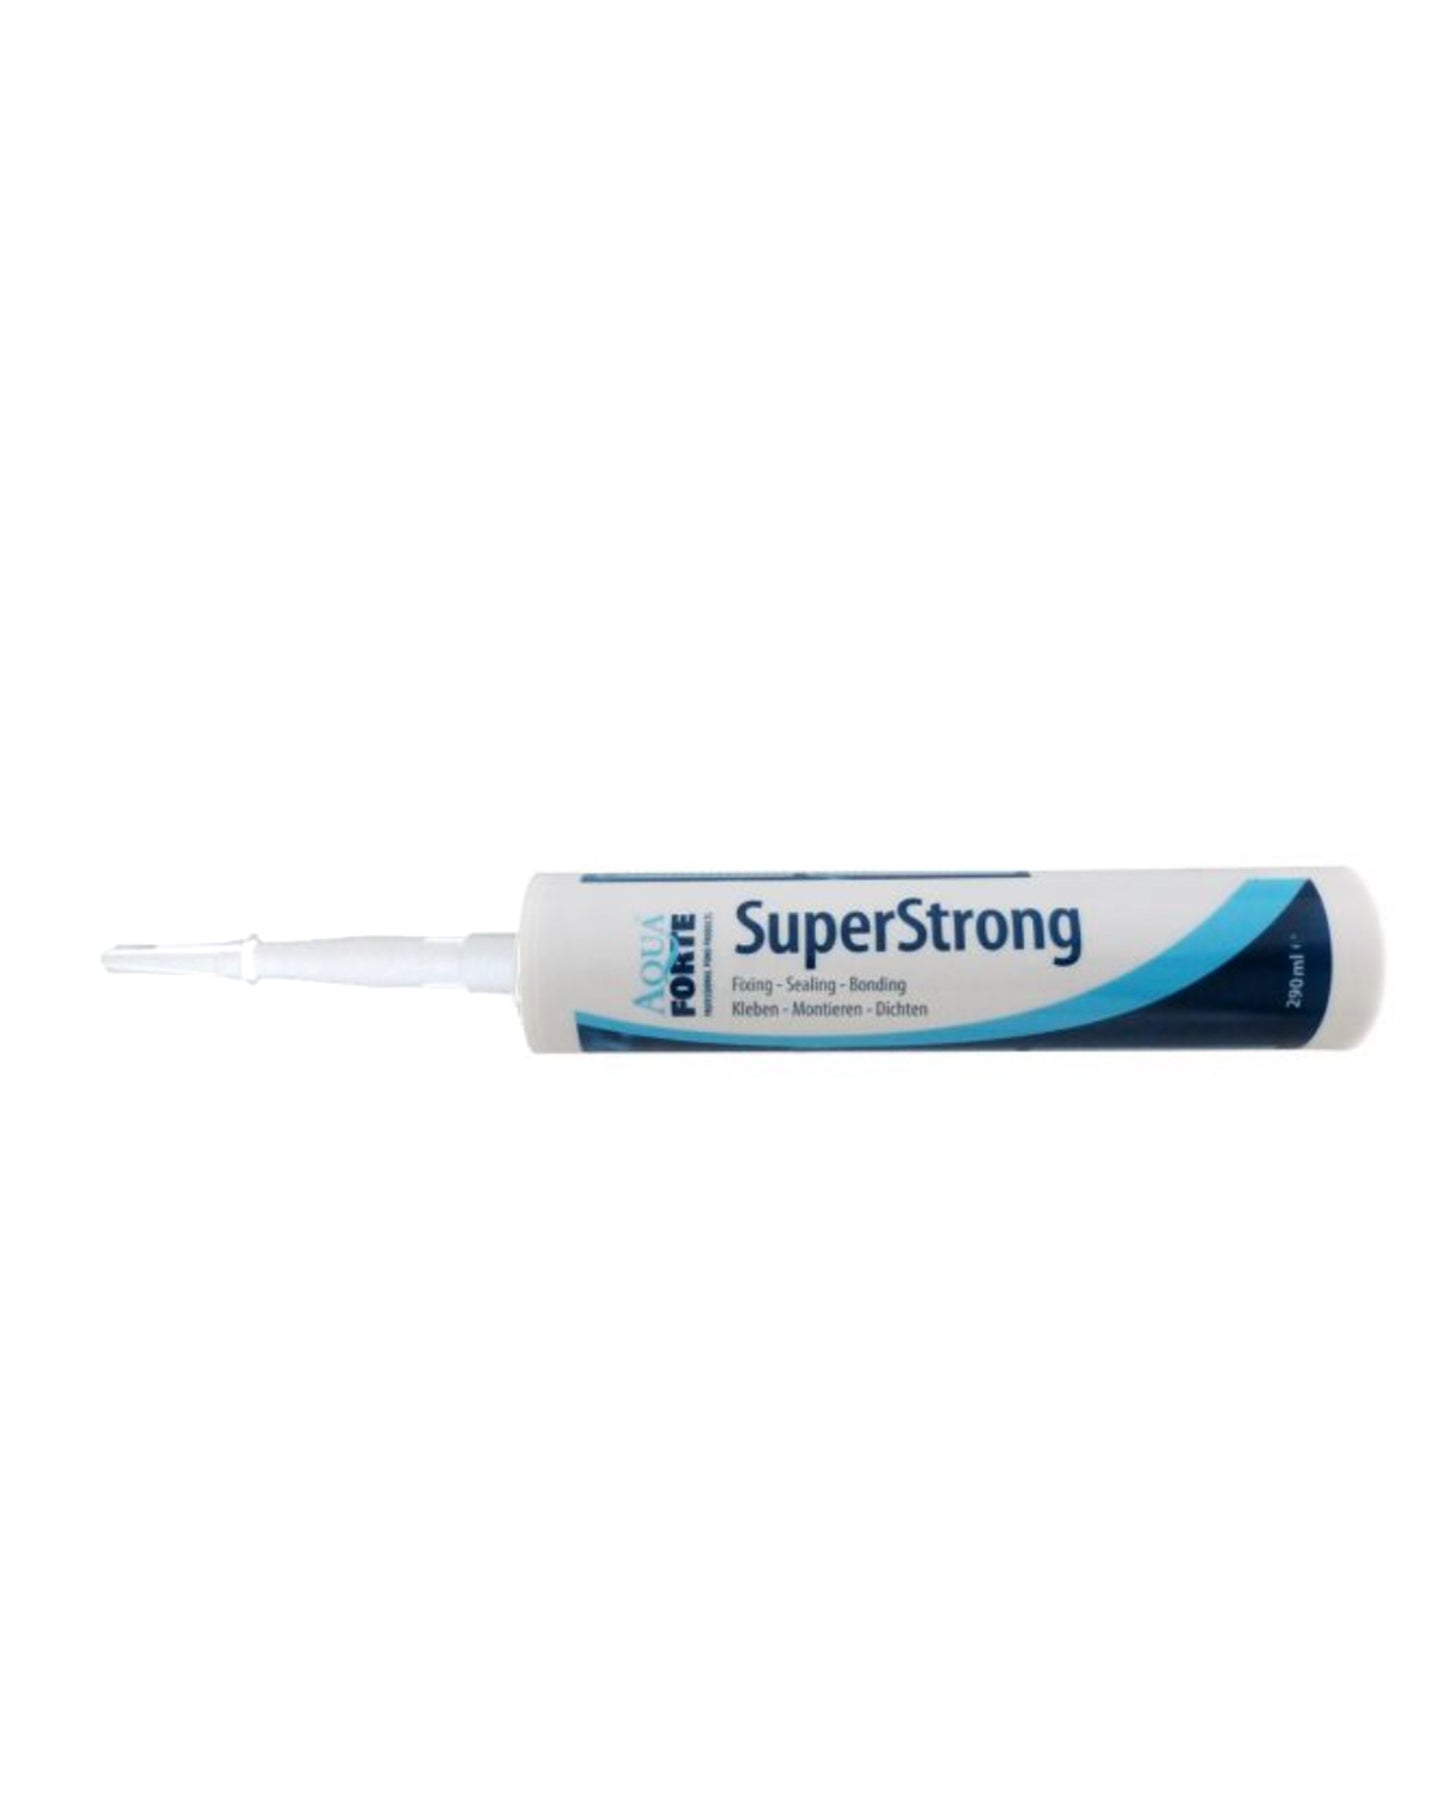 AquaForte Superstrong MS Polymer